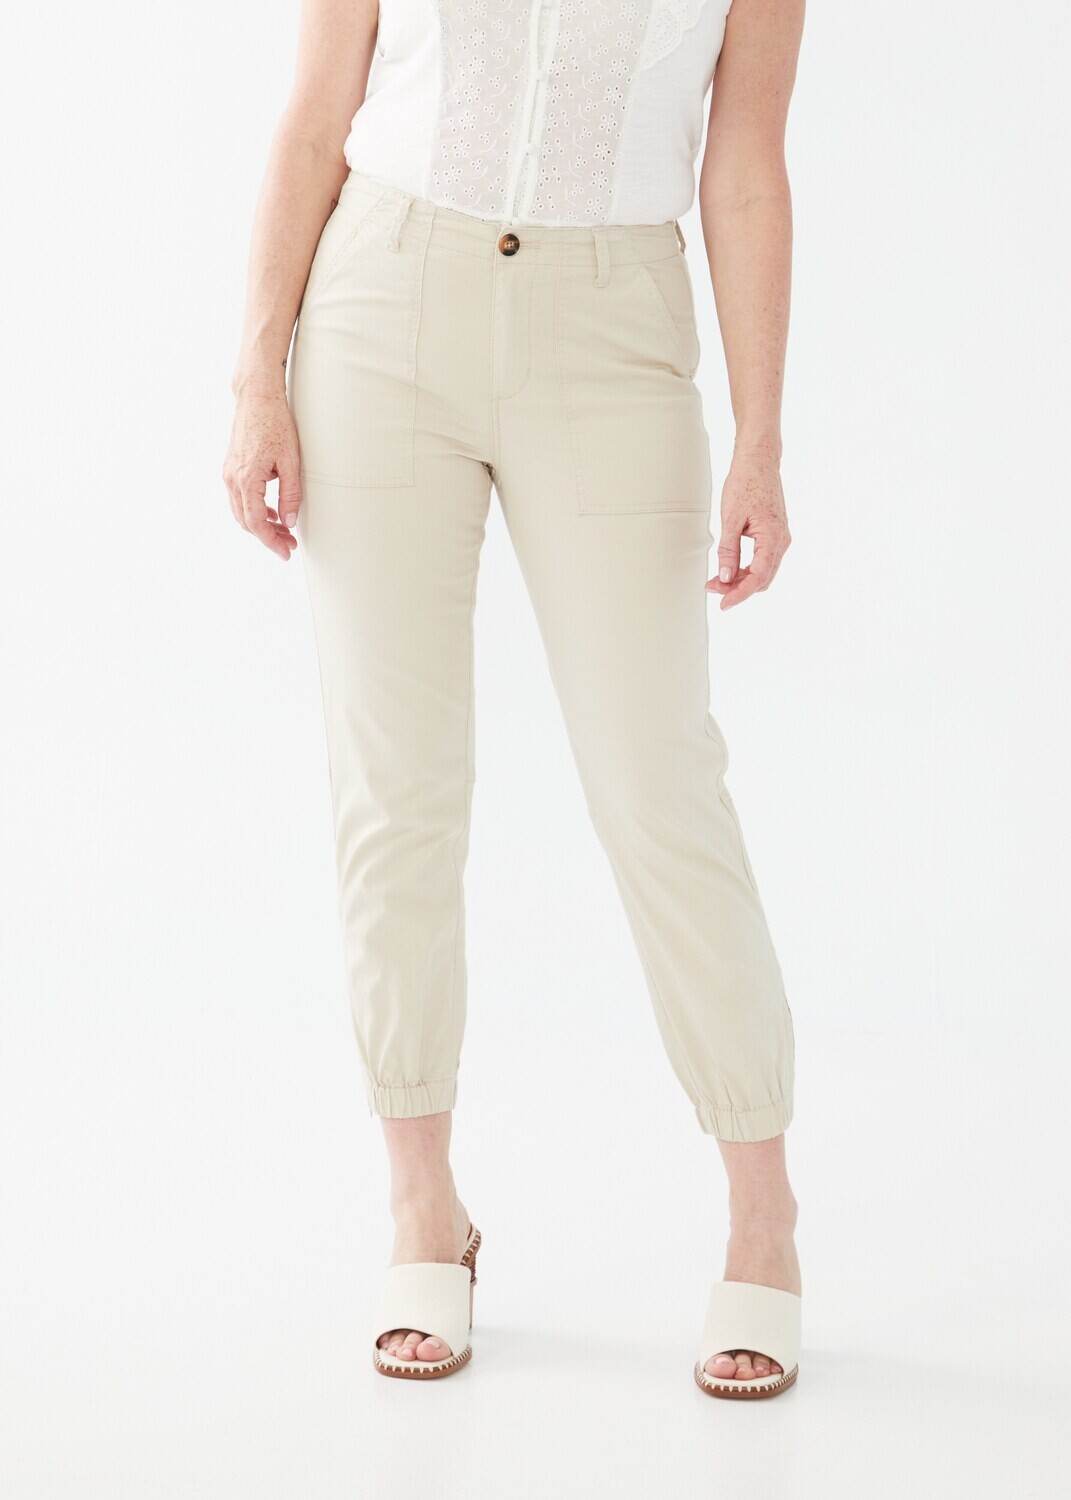 FDJ OLIVIA SLIM UTILITY ANKLE PANT - OYSTER SHELL, Size: 6